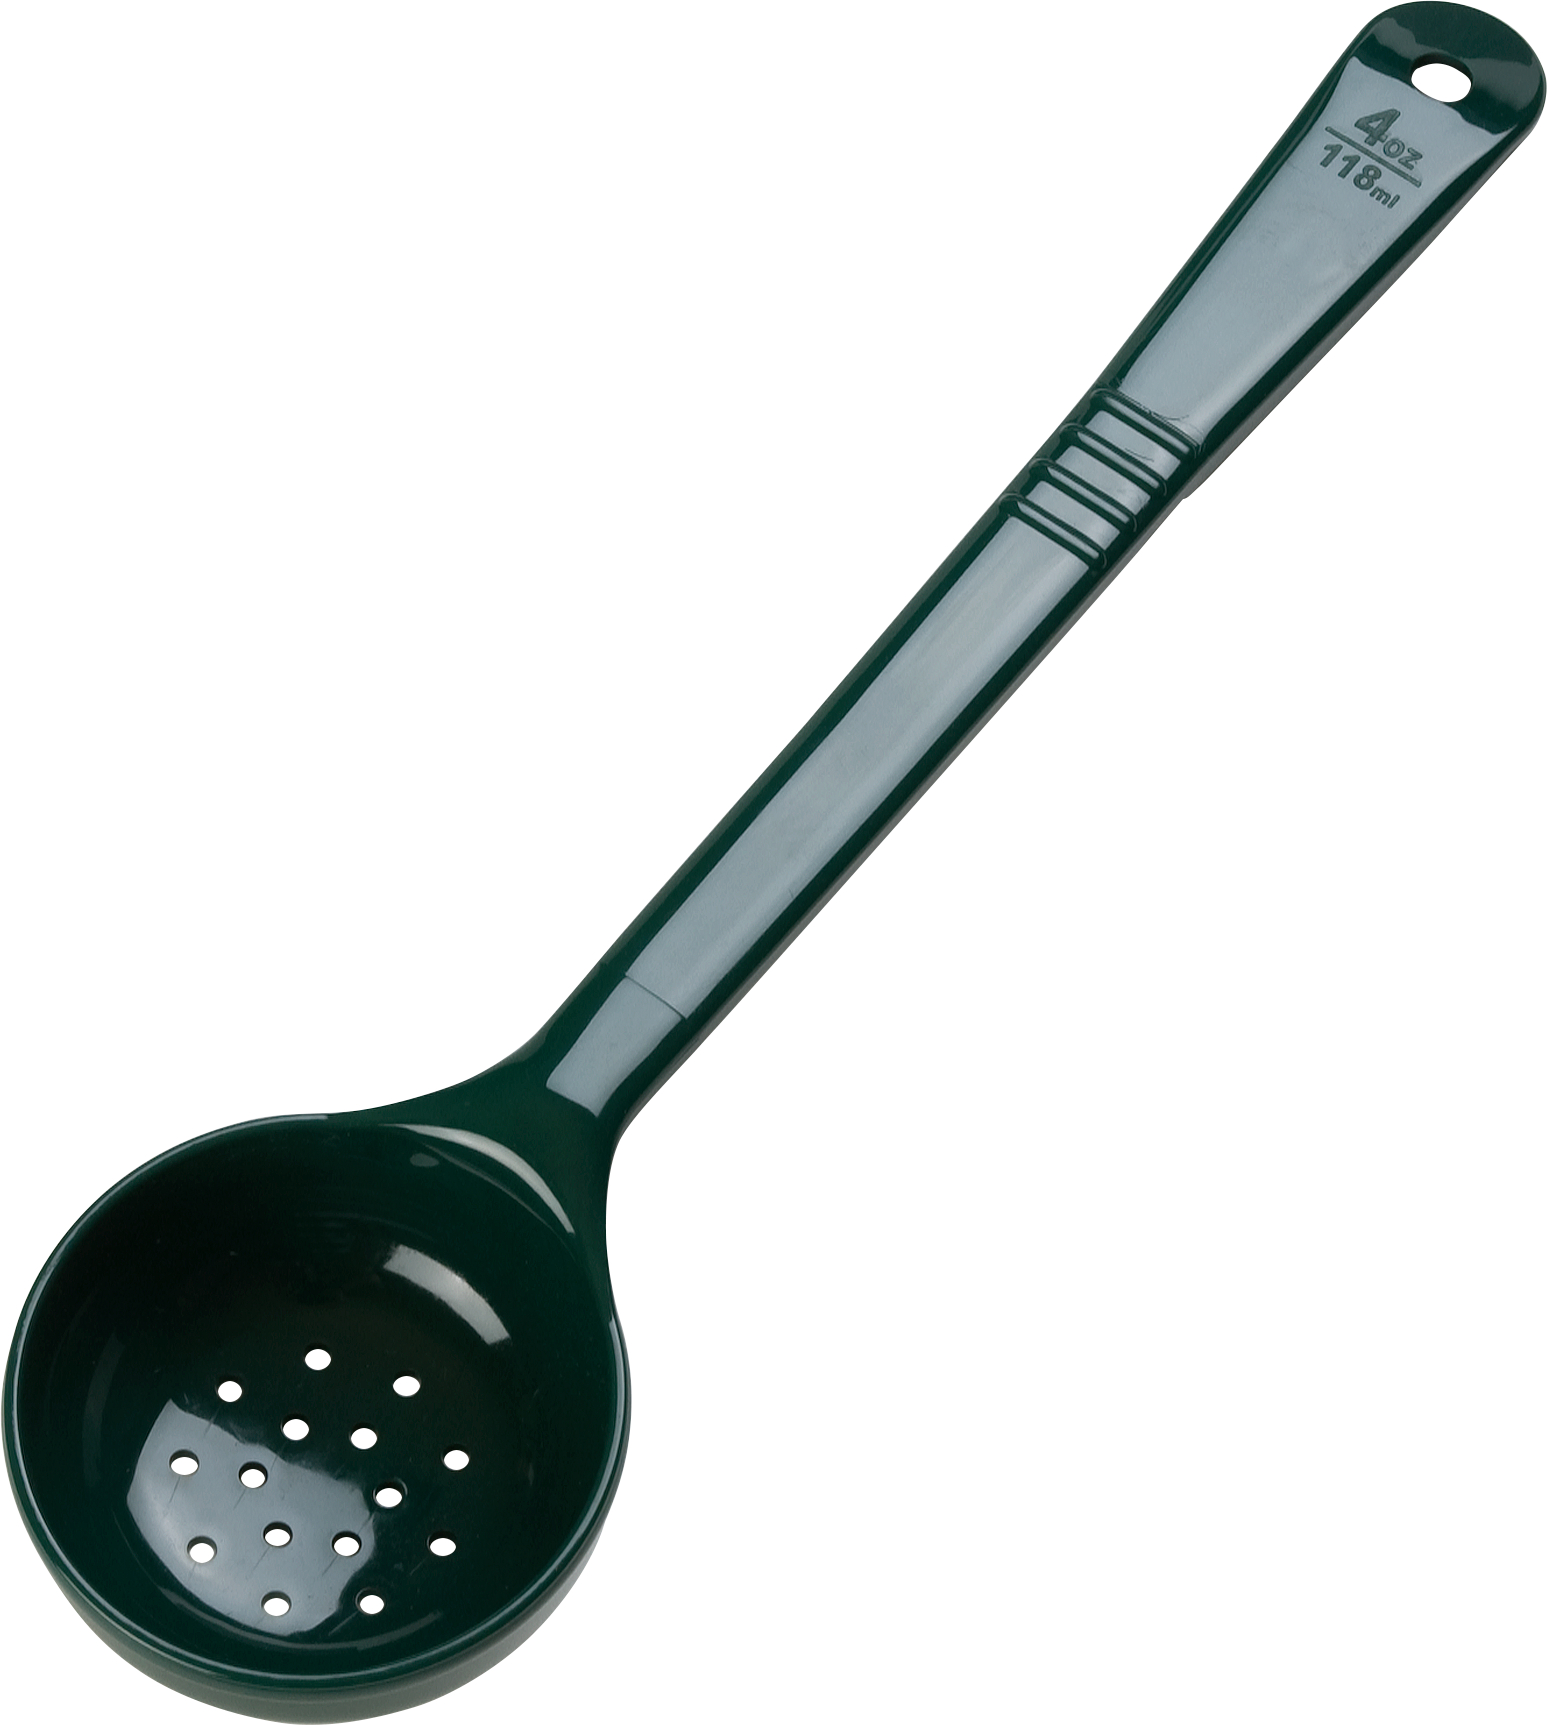 Measure Miser Perforated Long Handle 4 oz - Forest Green